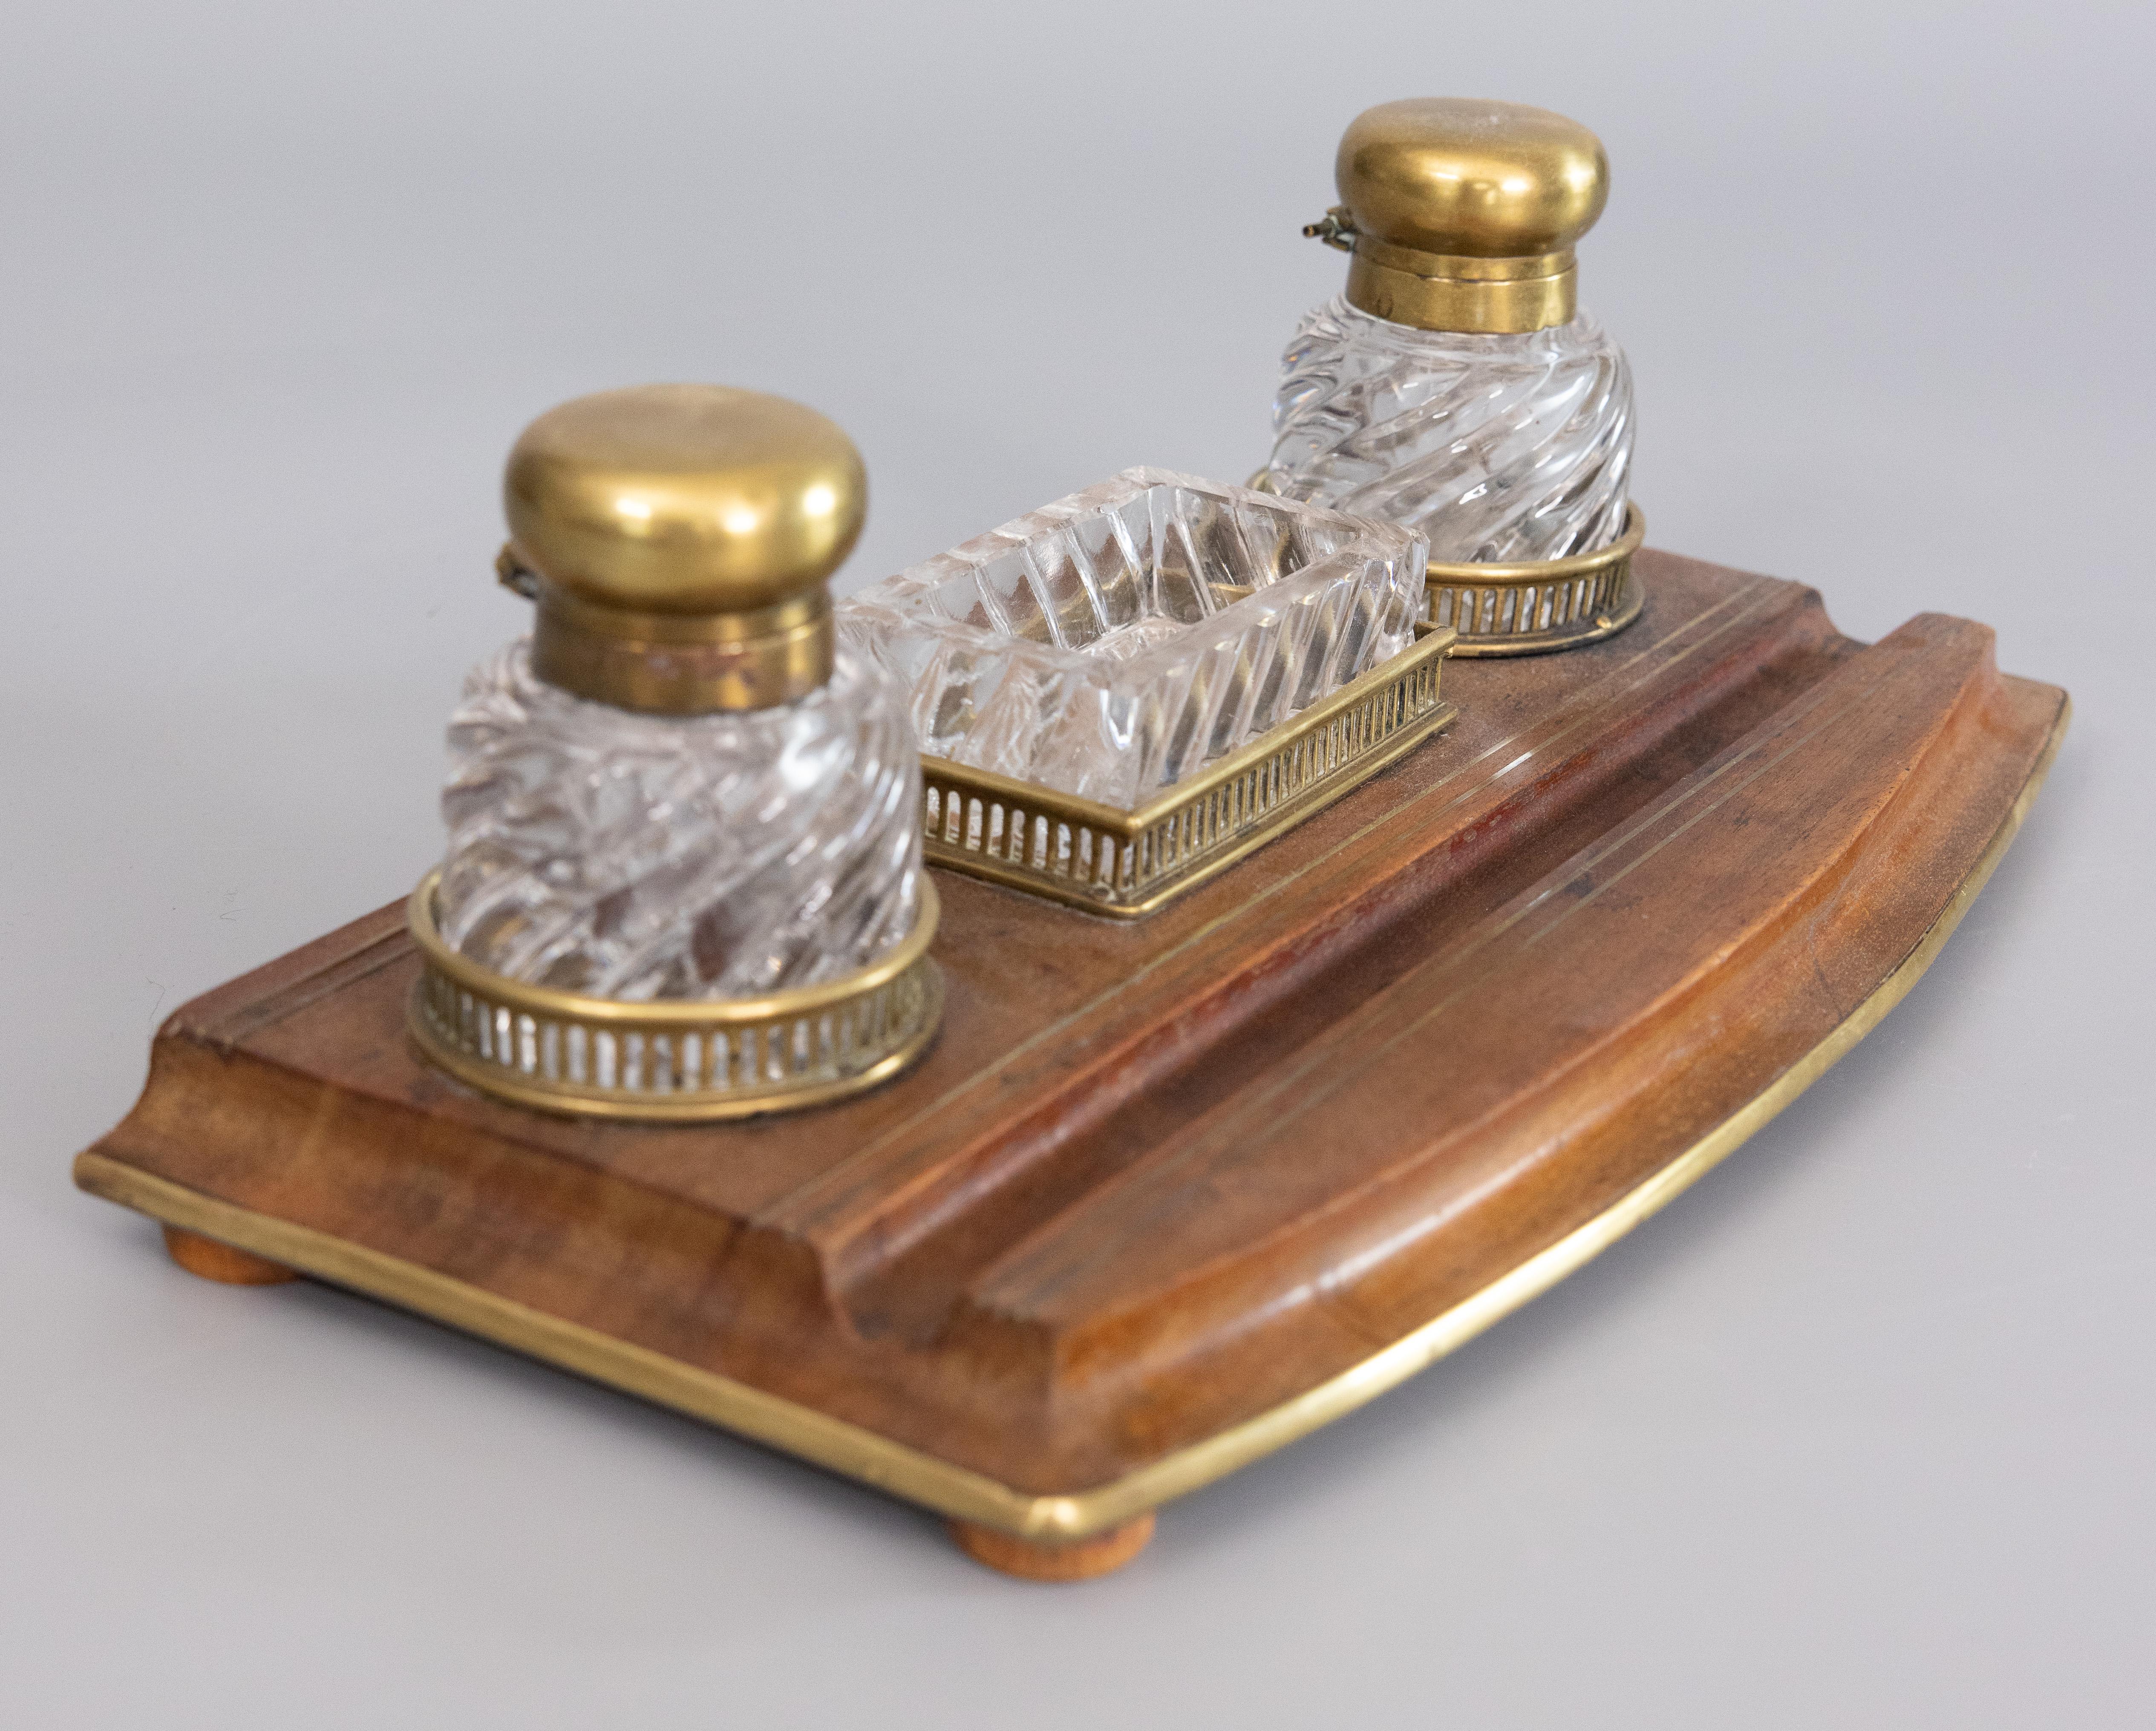 A fine 19th-century French Baccarat crystal and oak double inkwell and pen tray desk set. Signed 